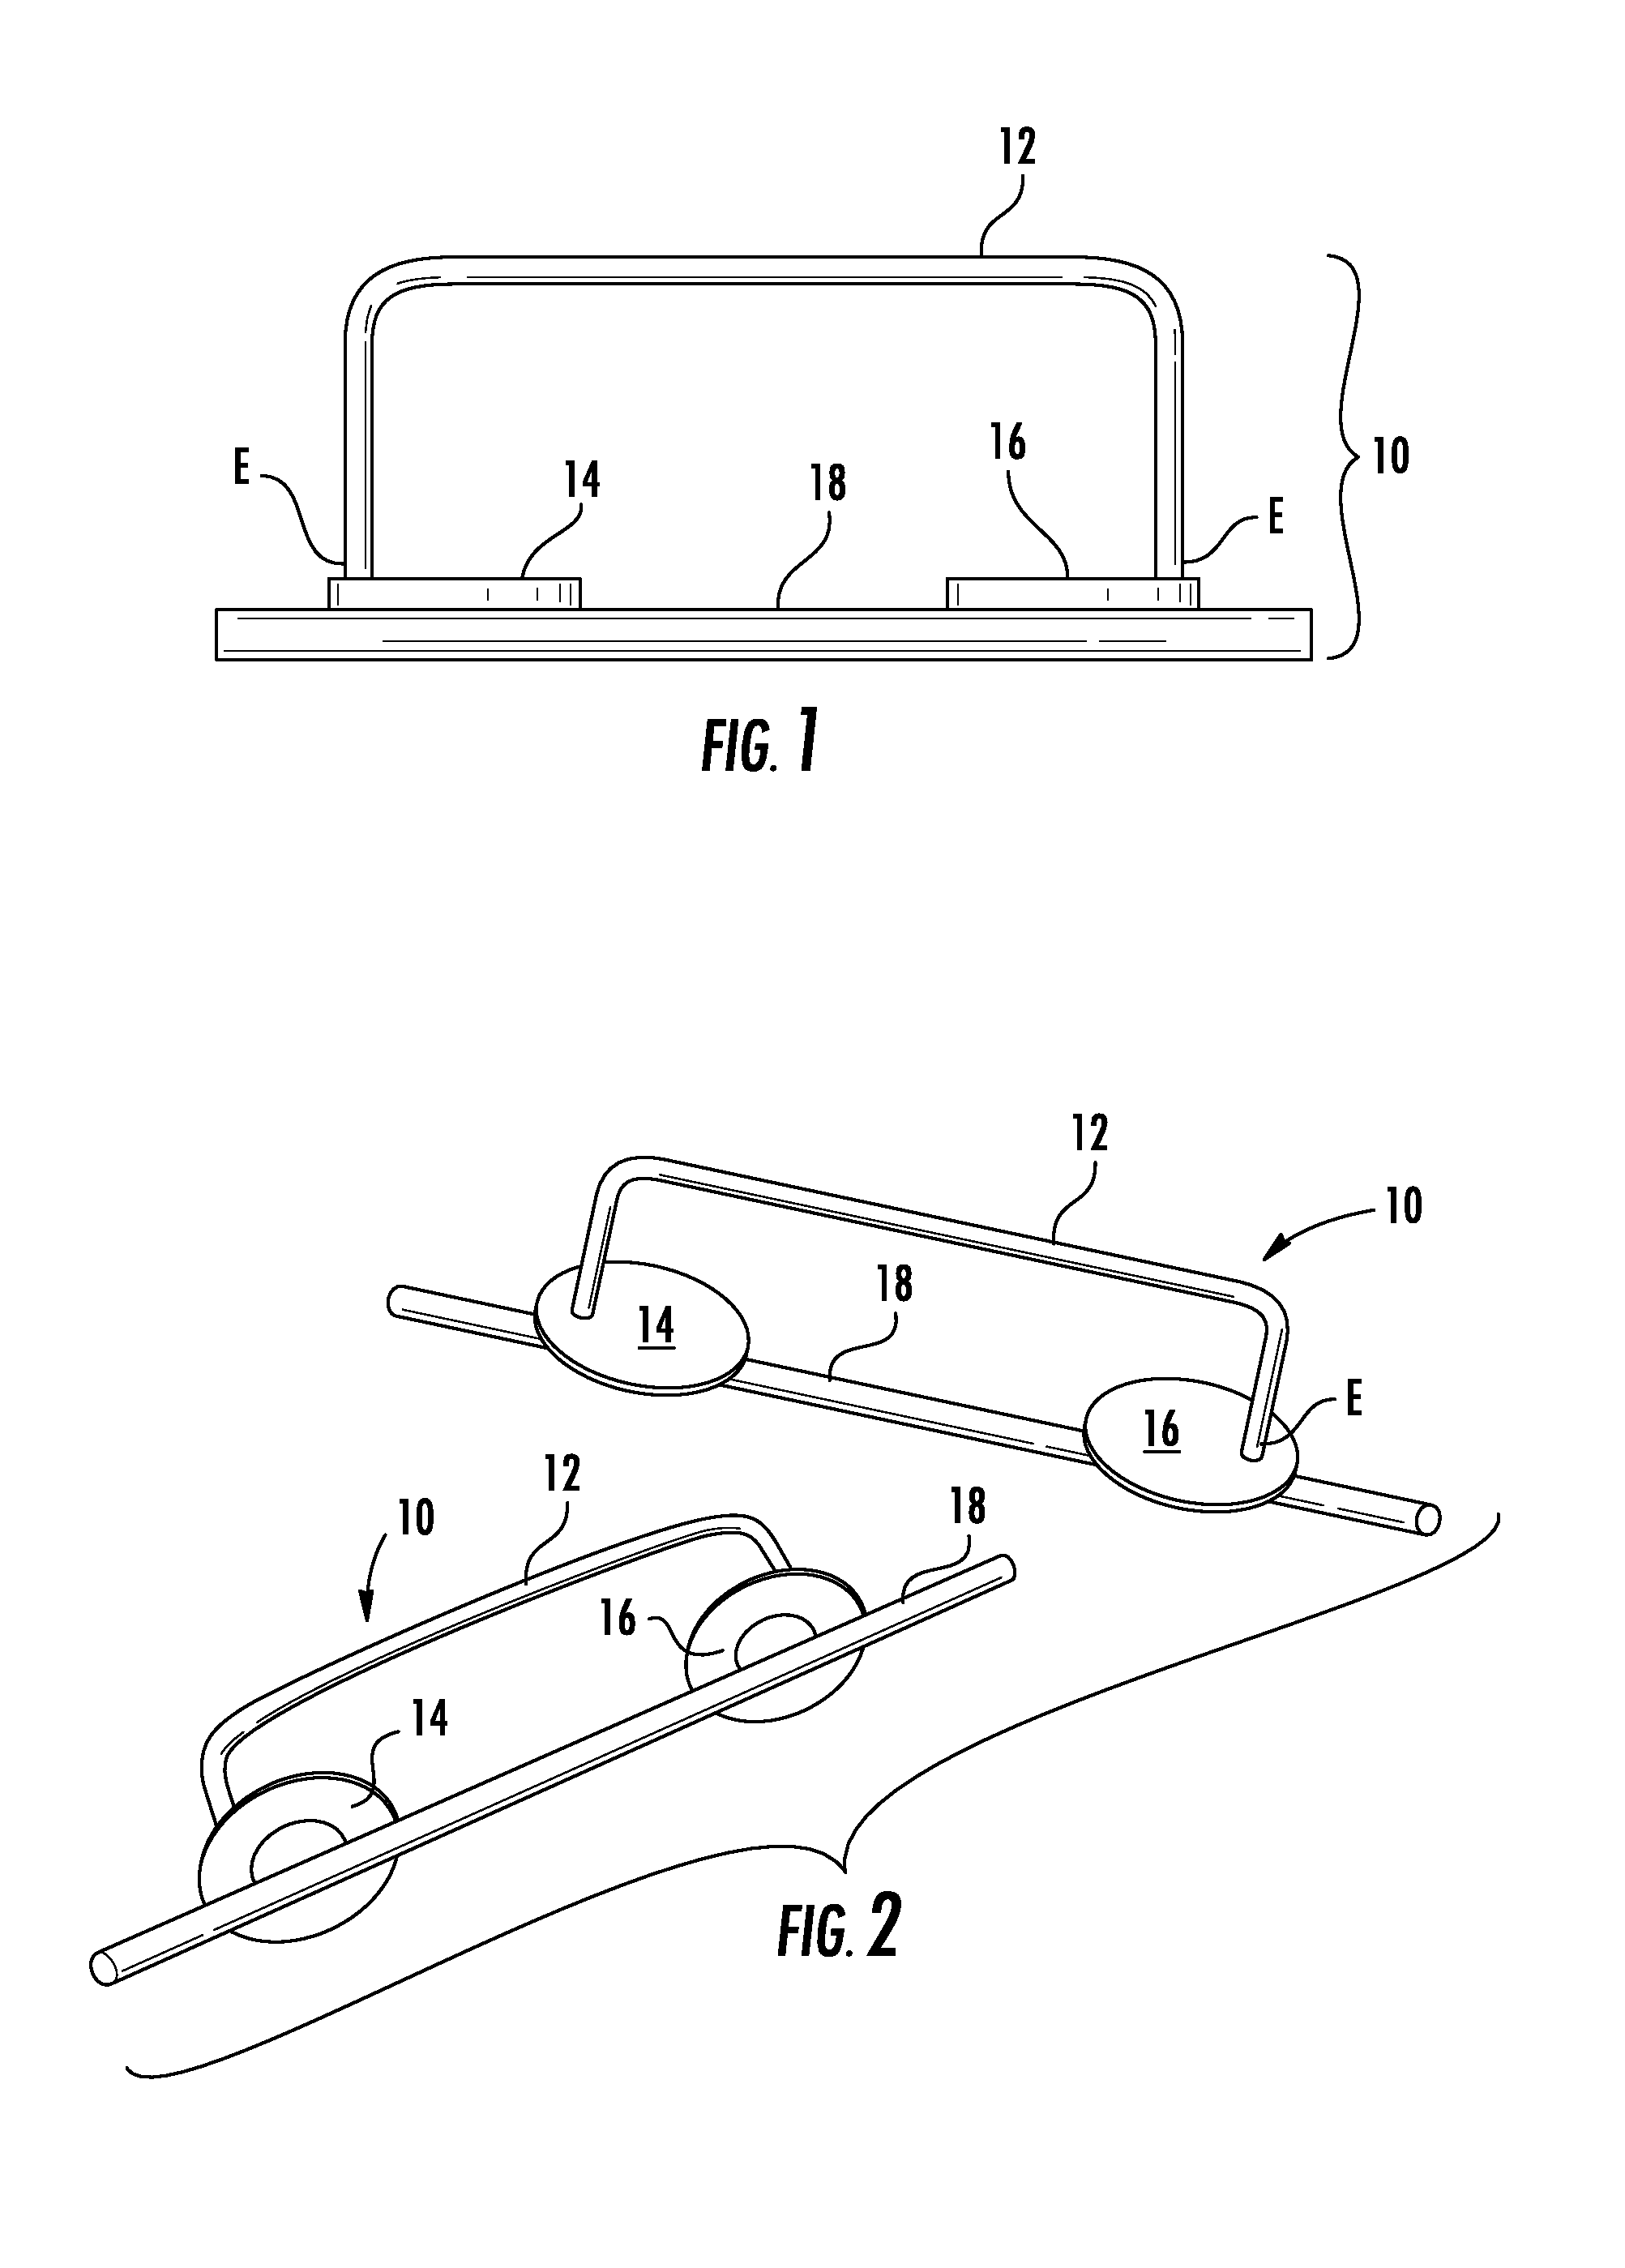 Tile spacing device and method of use